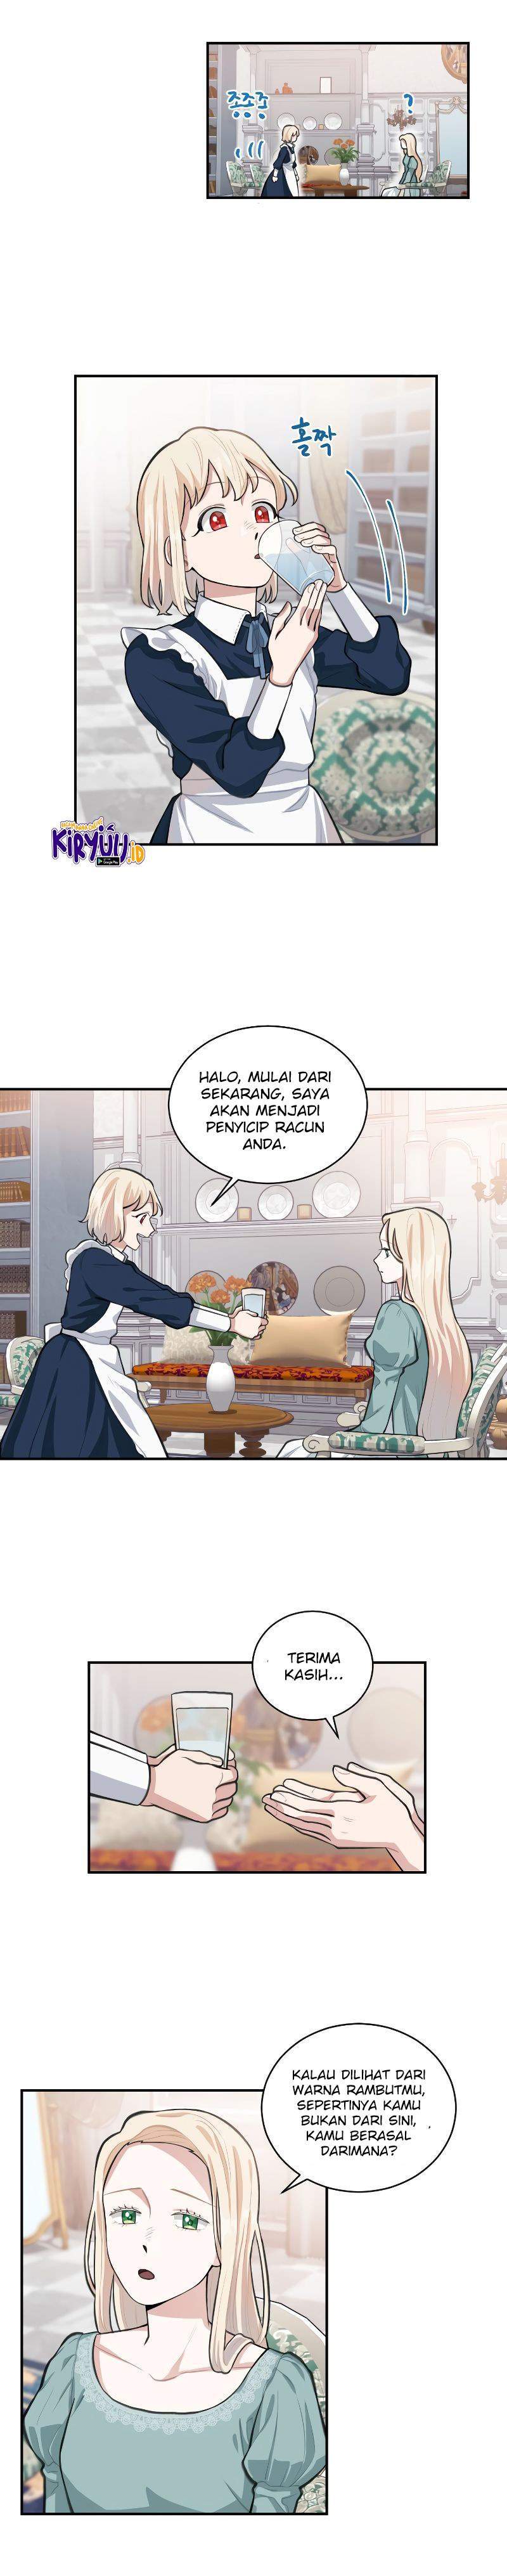 I Became a Maid in a TL Novel Chapter 3 21